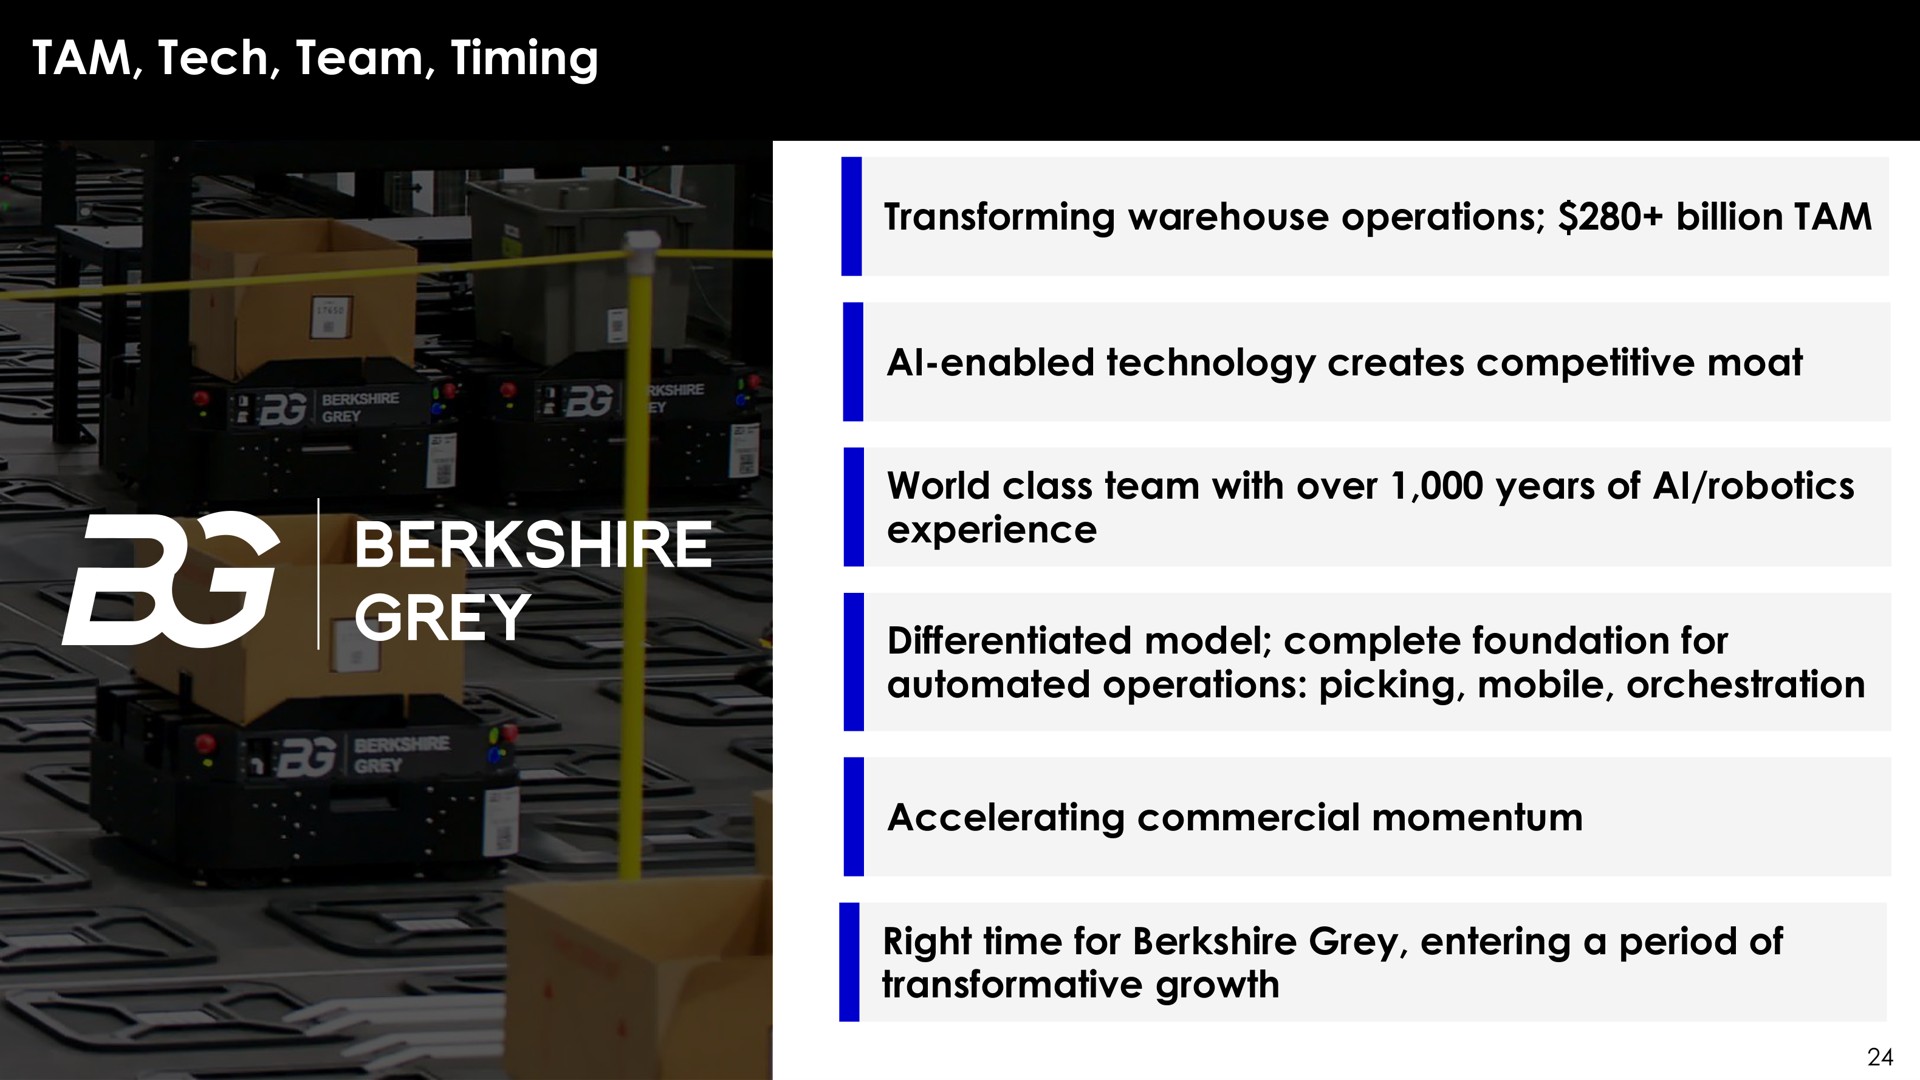 tam tech team timing neal grey transforming warehouse operations billion enabled technology creates competitive moat world class with over years of experience accelerating commercial momentum differentiated model complete foundation for operations picking mobile orchestration transformative growth right time for grey entering a period of | Berkshire Grey